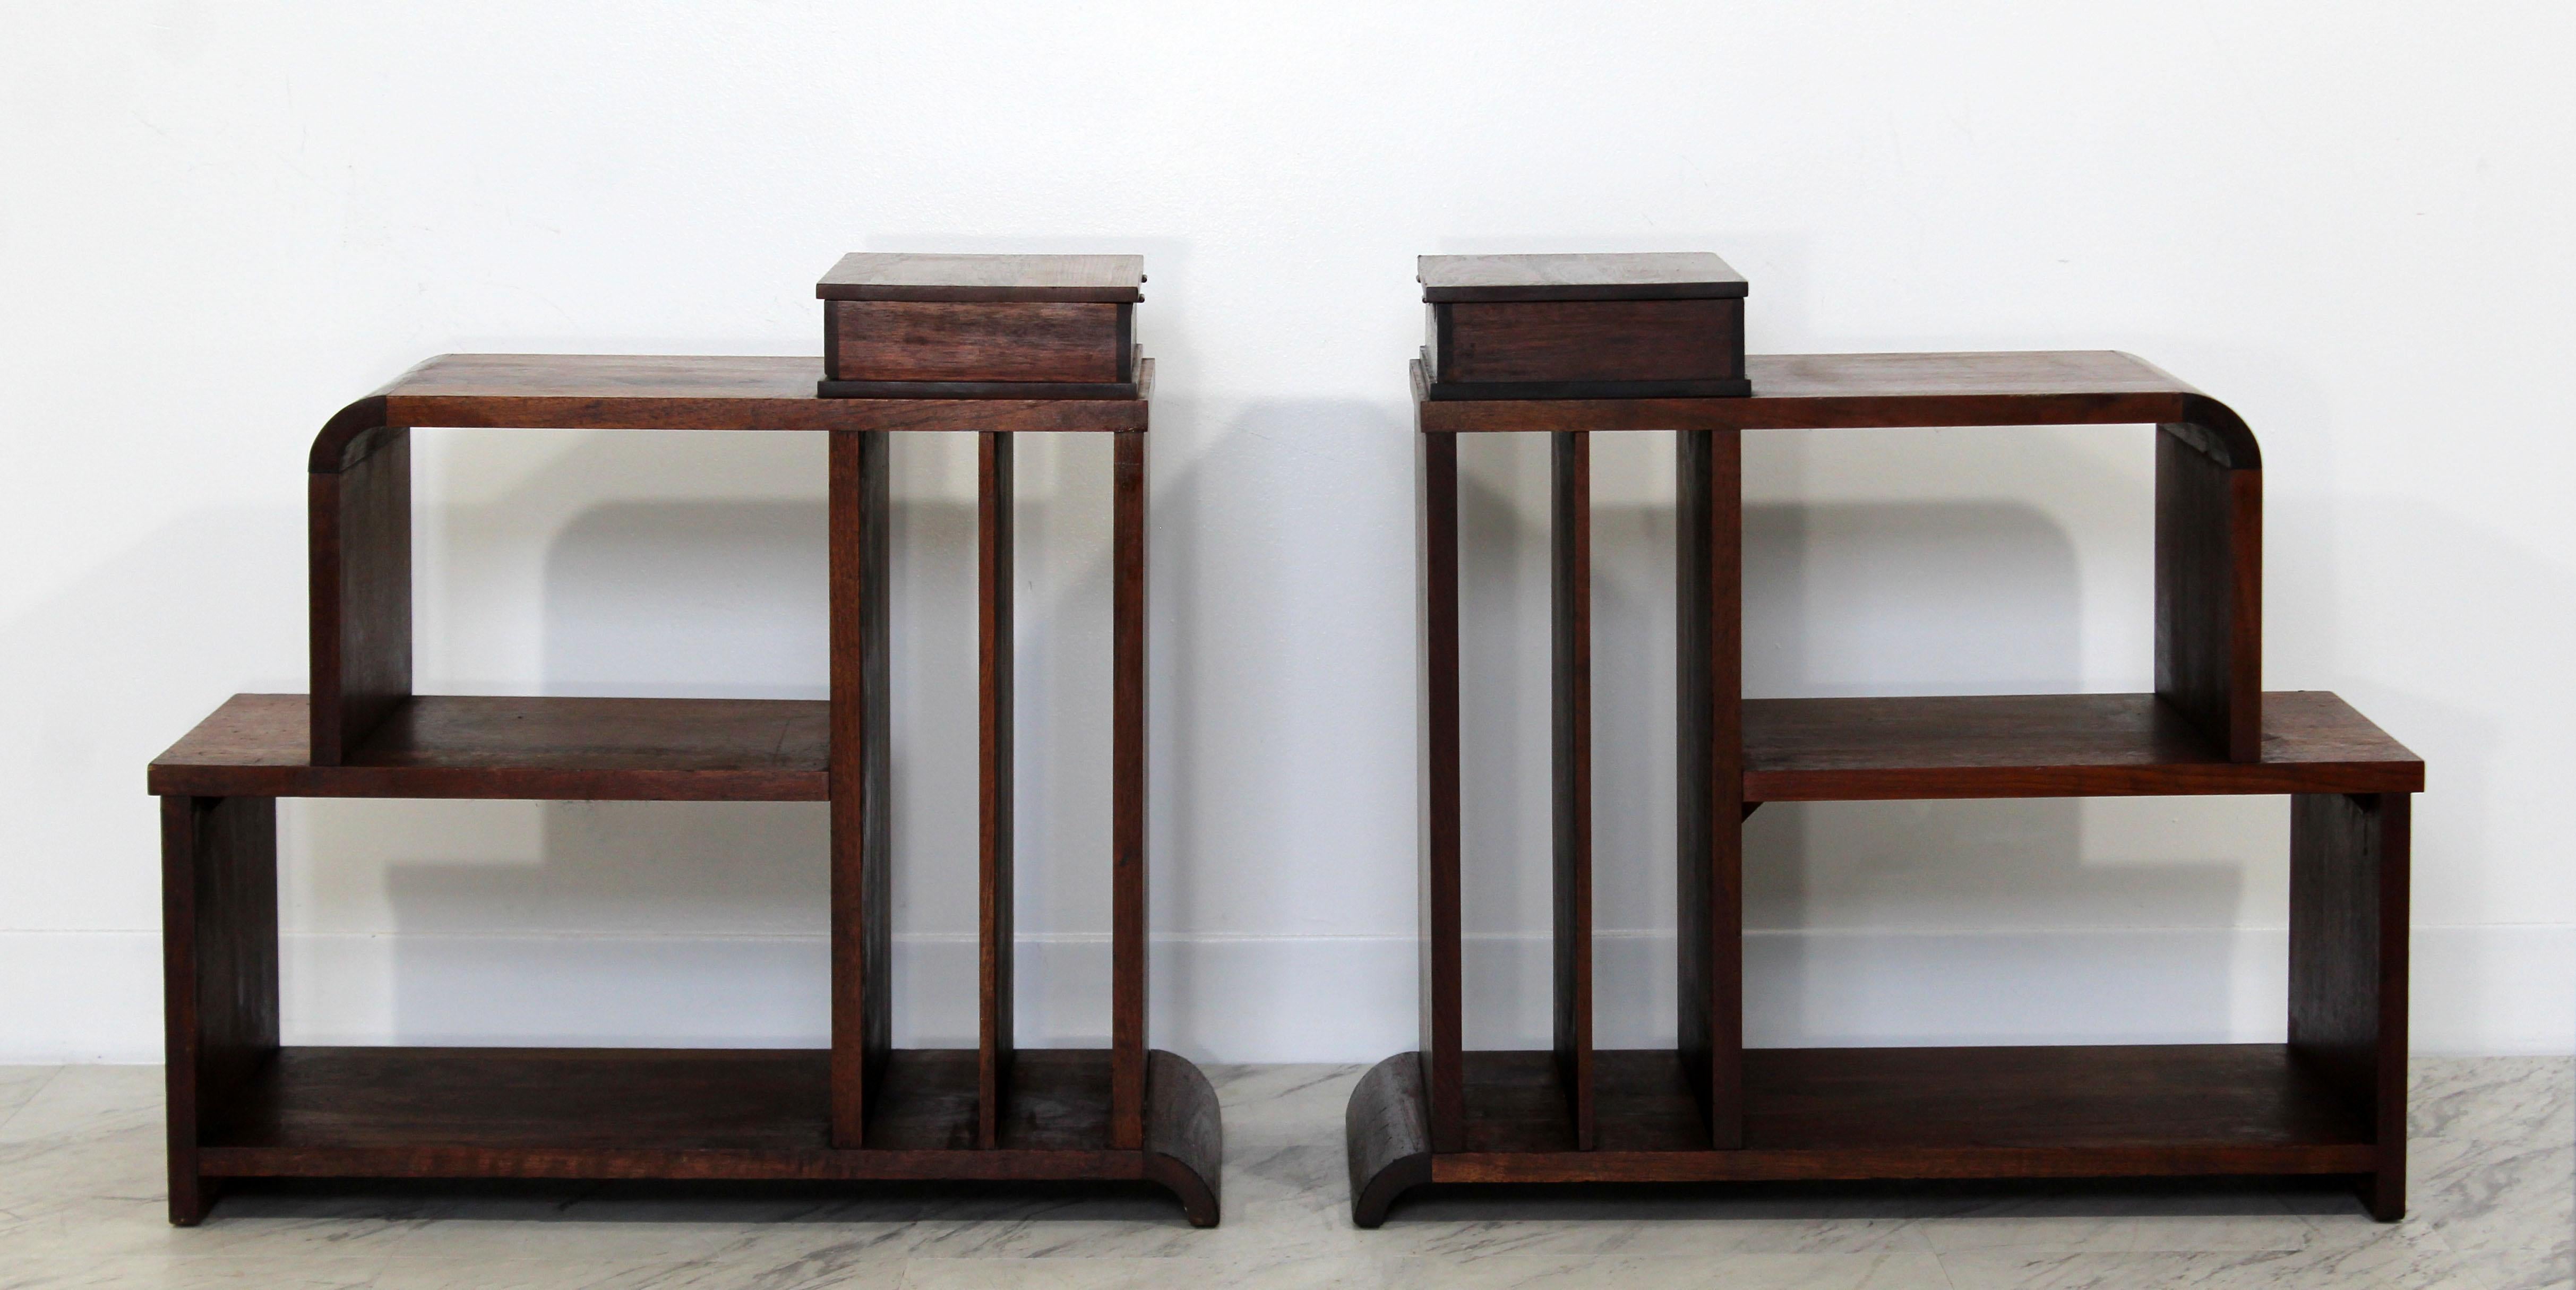 For your consideration is a fantastic pair of tiered side or end table, made of walnut and with a lidded box on the top of each, in the style of Donald Desky, Gilbert Rohde or Paul Frankl. In very good condition. The dimensions of each are 12